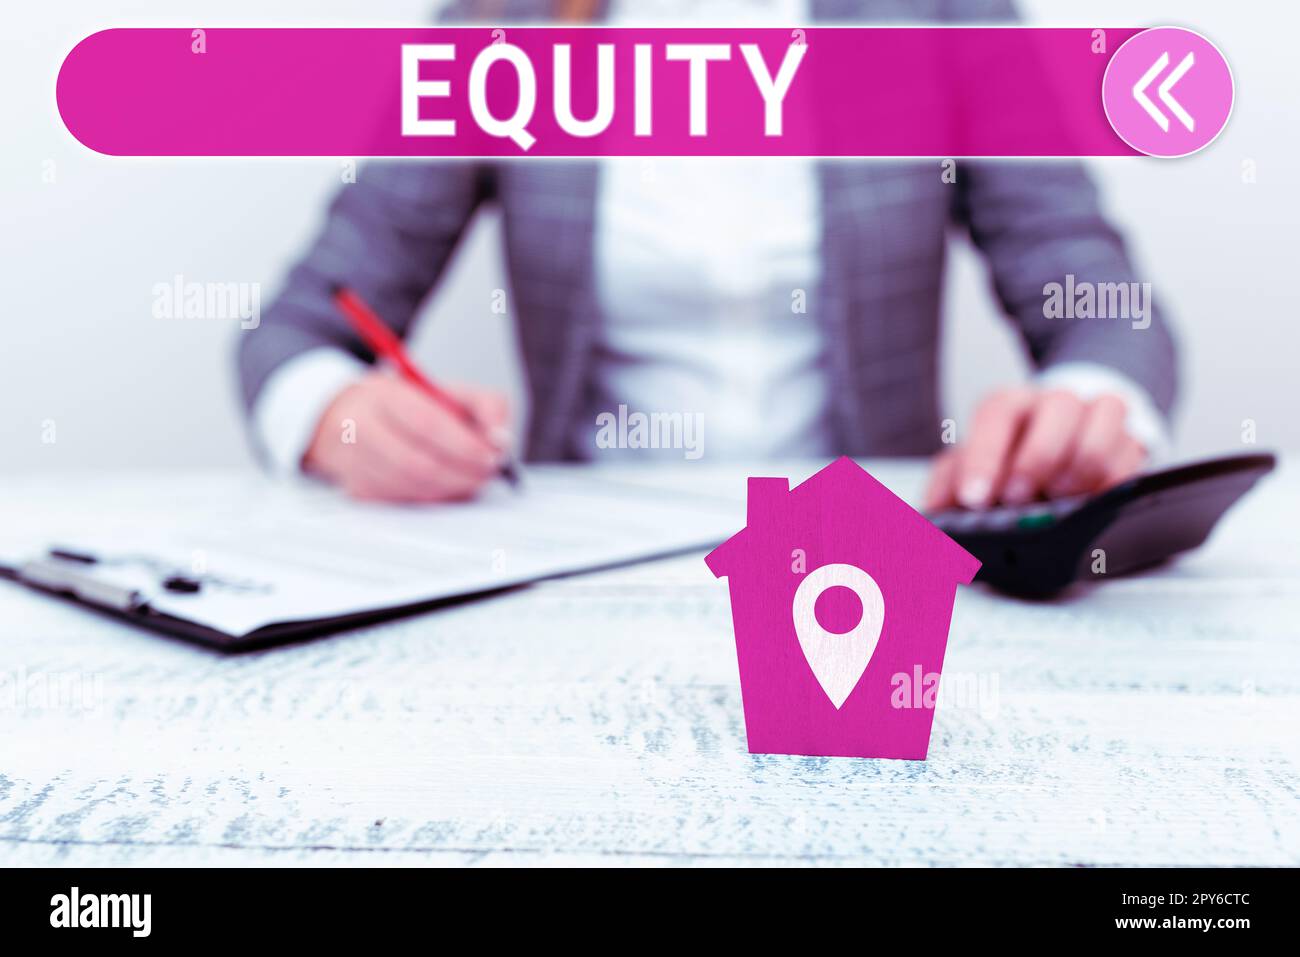 Sign displaying Equity. Concept meaning quality of being fair and impartial race free One hand Unity Stock Photo